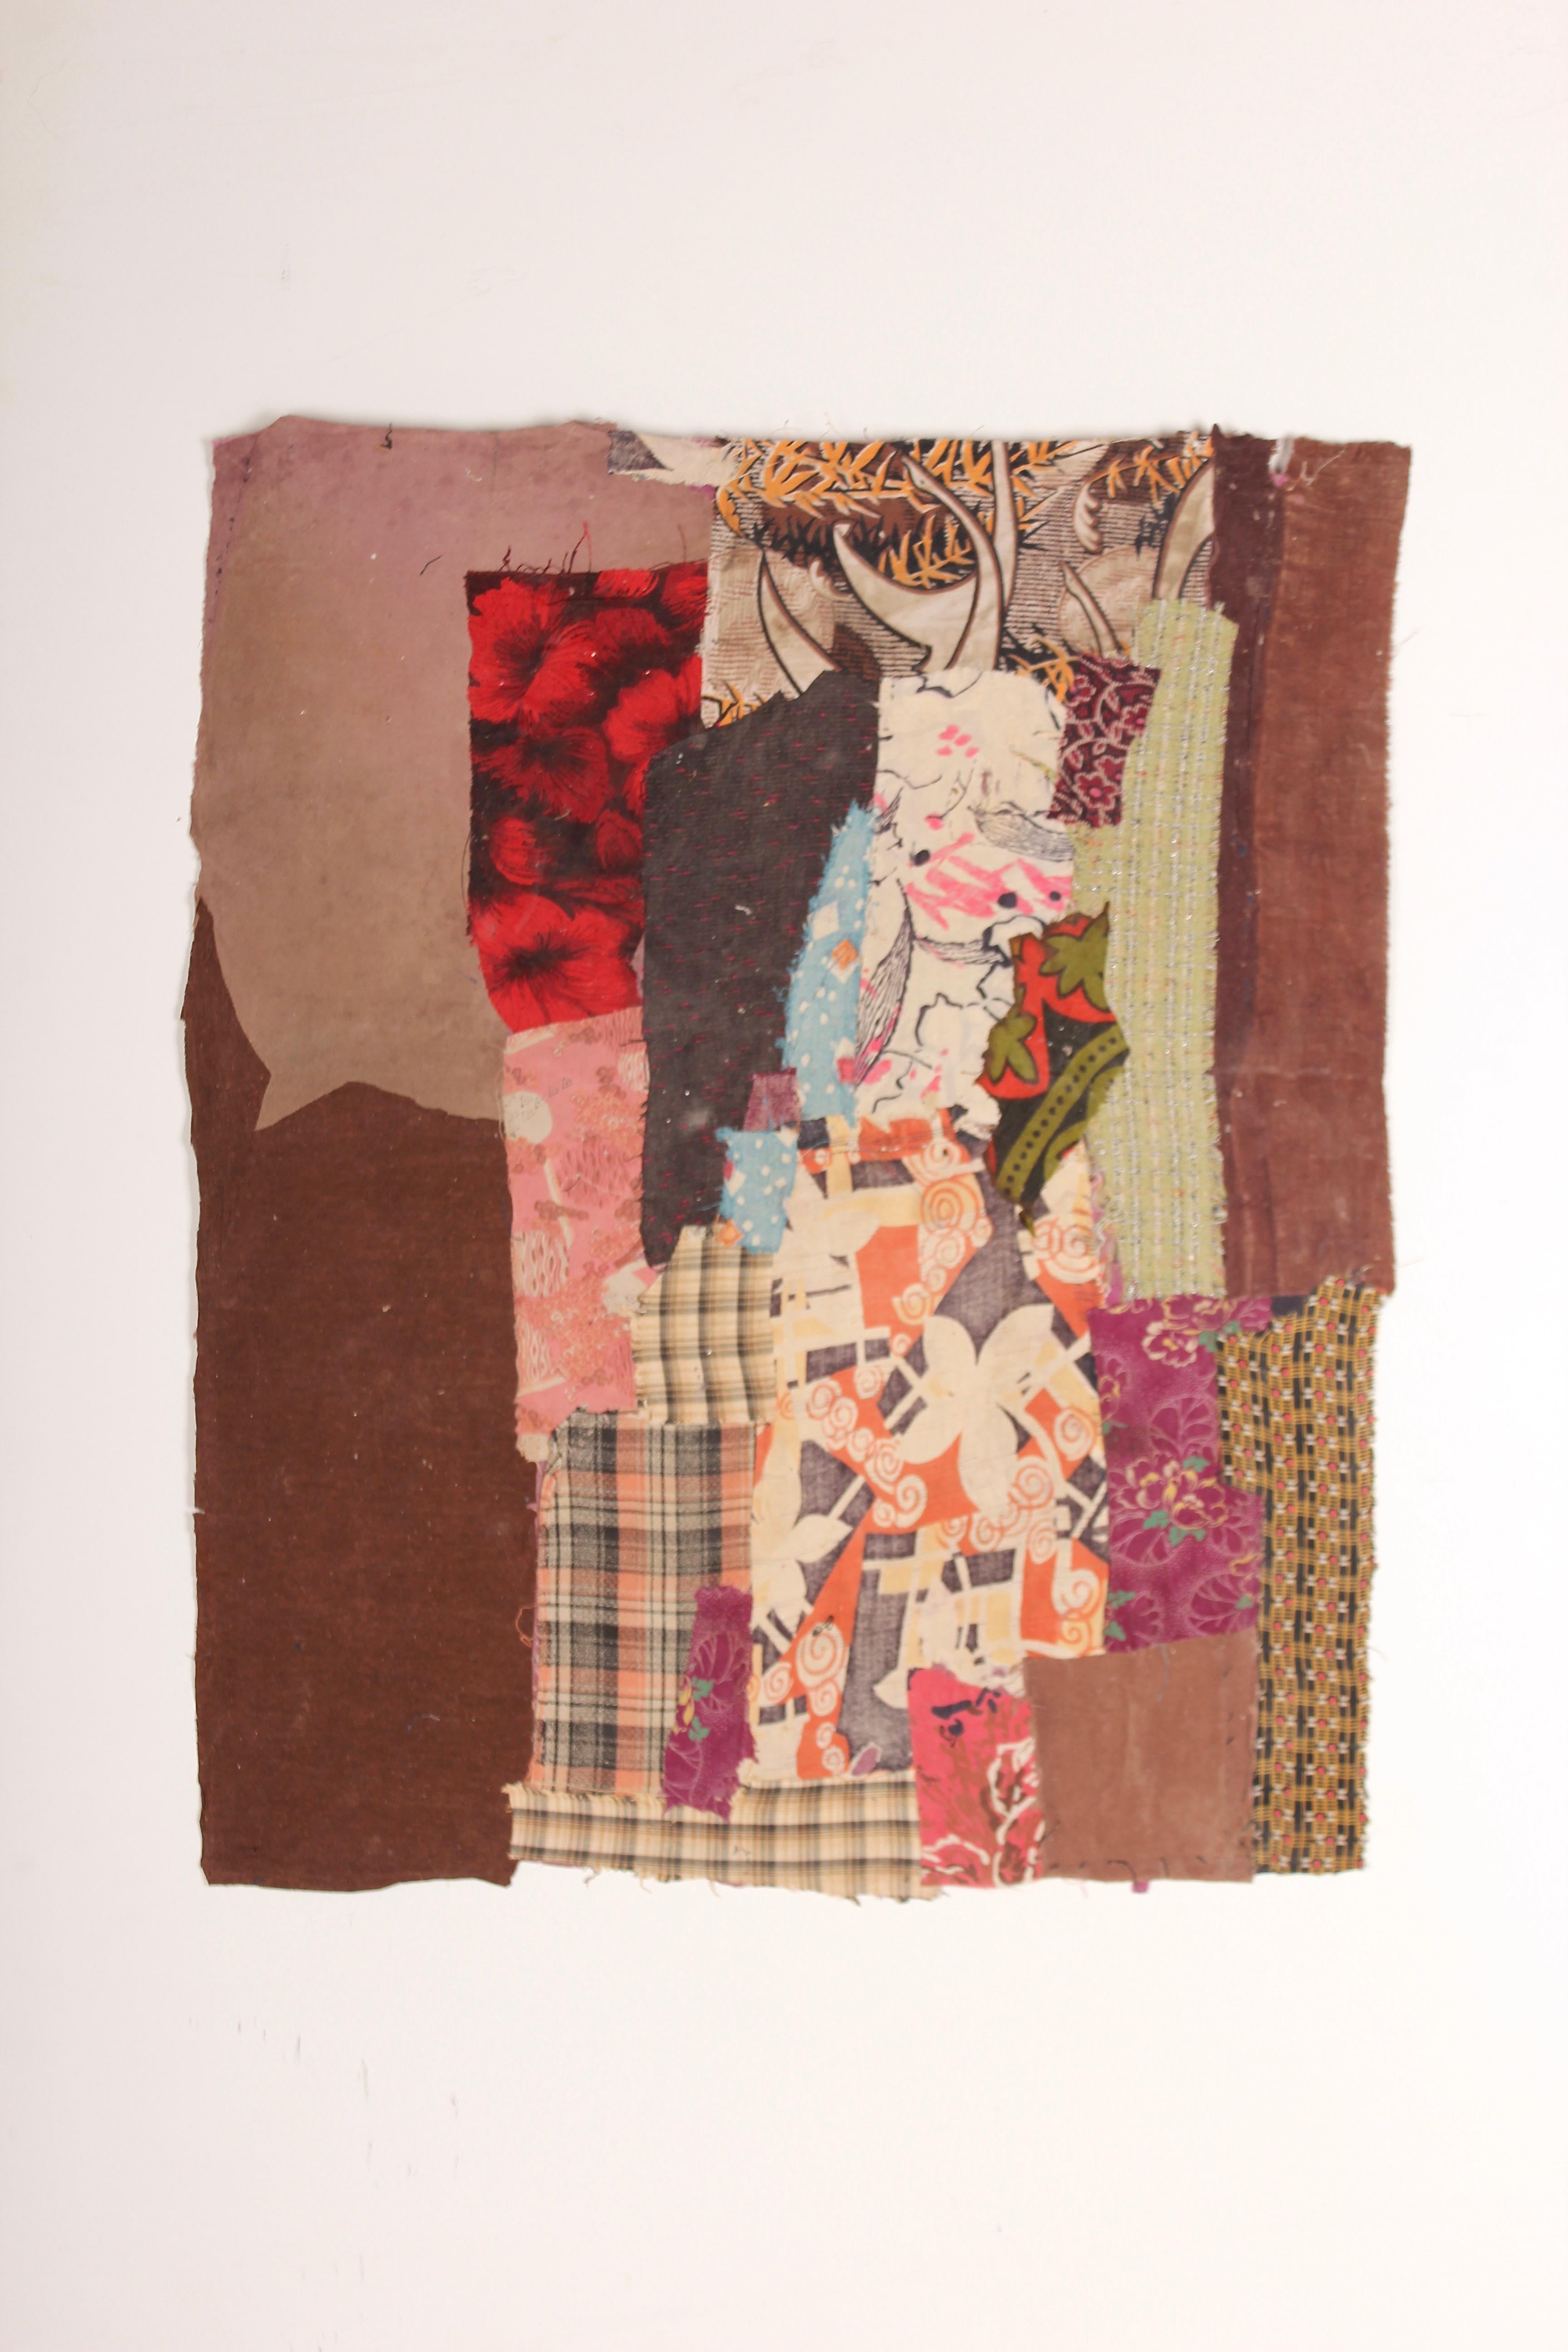 These Ge BA’s come from the collection of François Dautresme Chinese collaged, Ge Ba ephemeral textile “paintings” of extraordinary beauty made by women in China countryside in 1950.
It is a collage of glued-together cloths that were cut and mainly